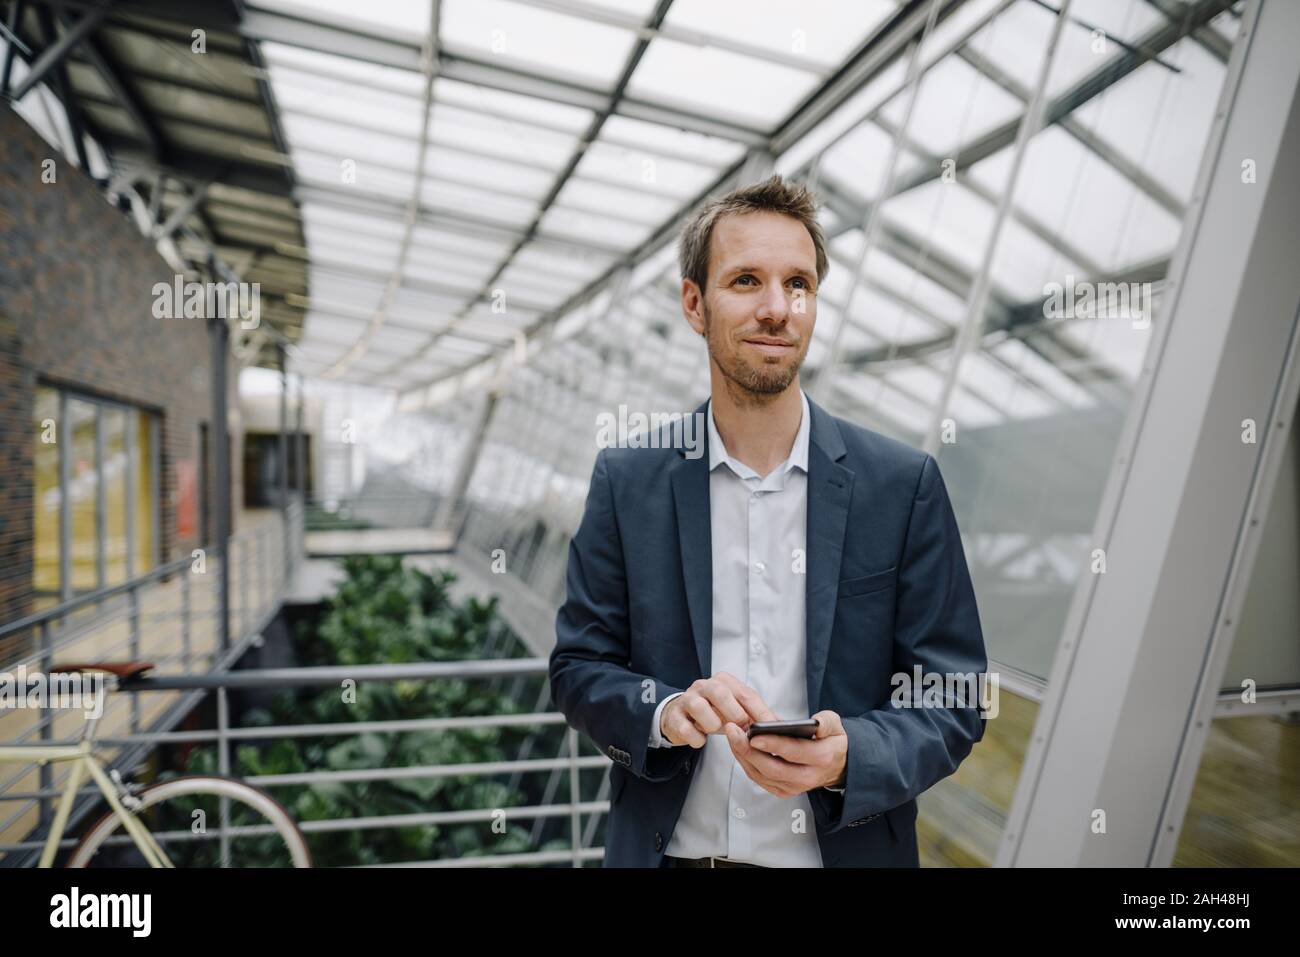 Smiling businessman using cell phone in modern office building Stock Photo